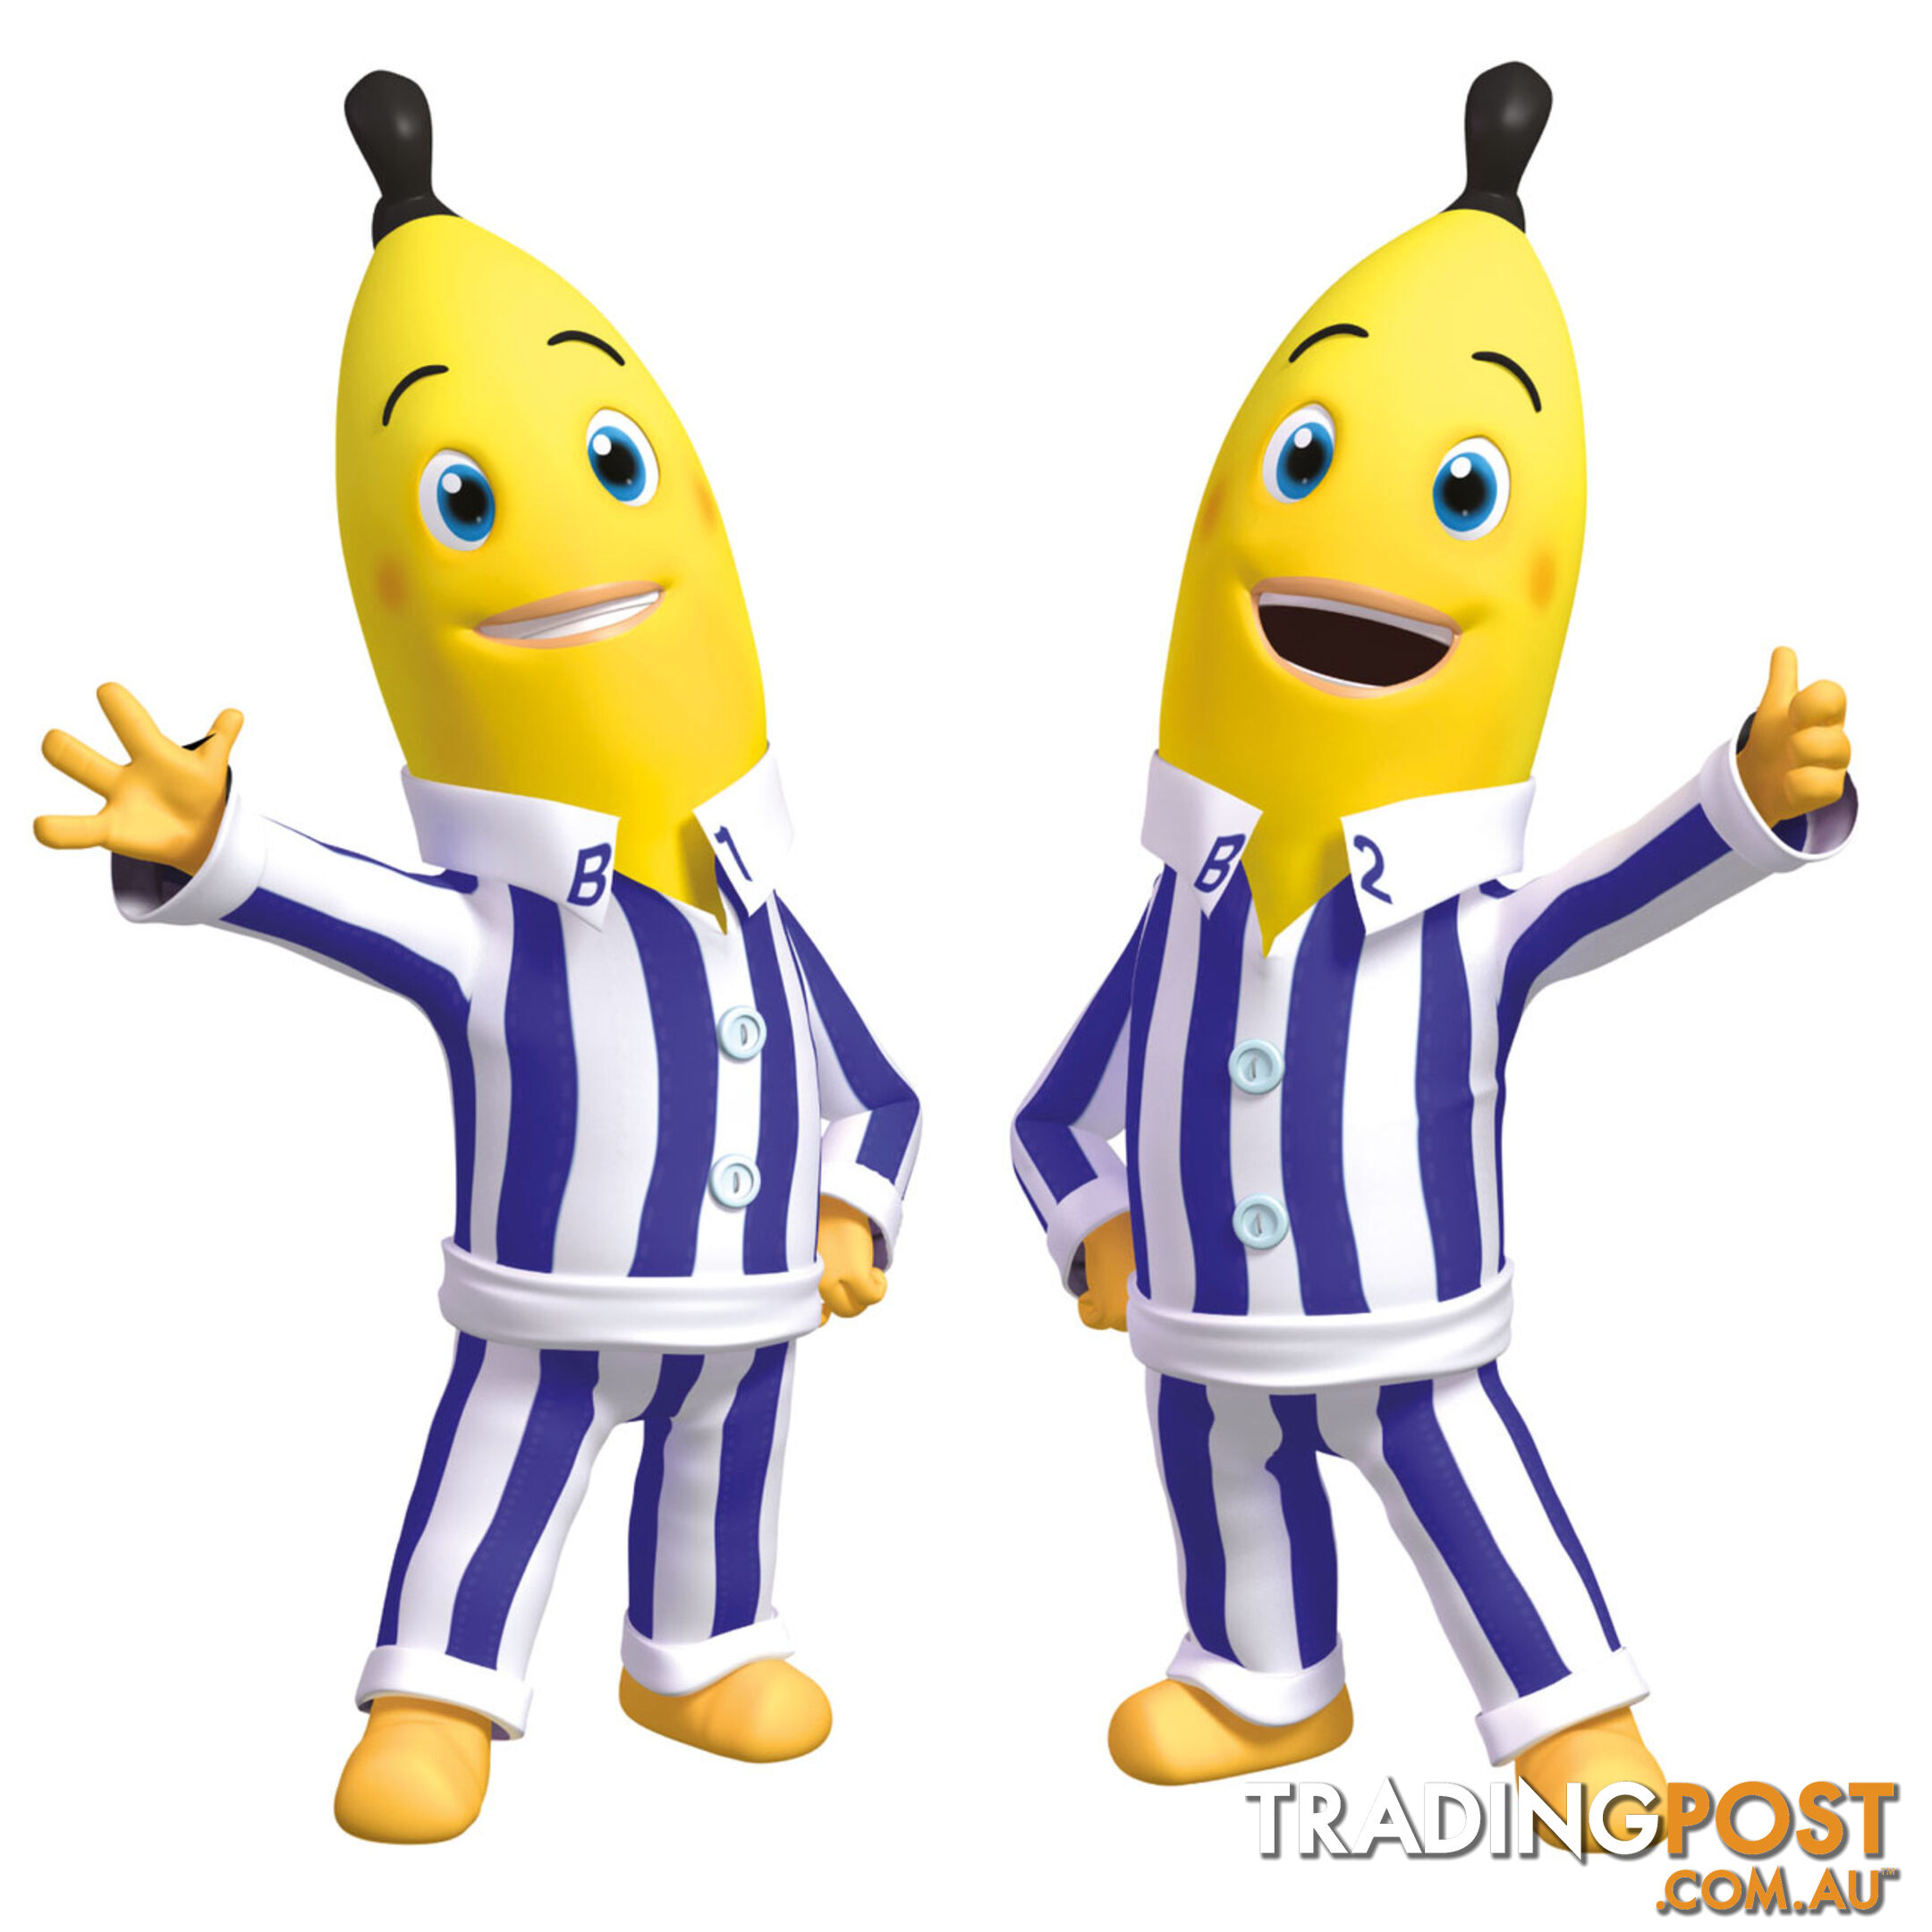 10 X Bananas in Pyjamas Wall Stickers - Totally Movable